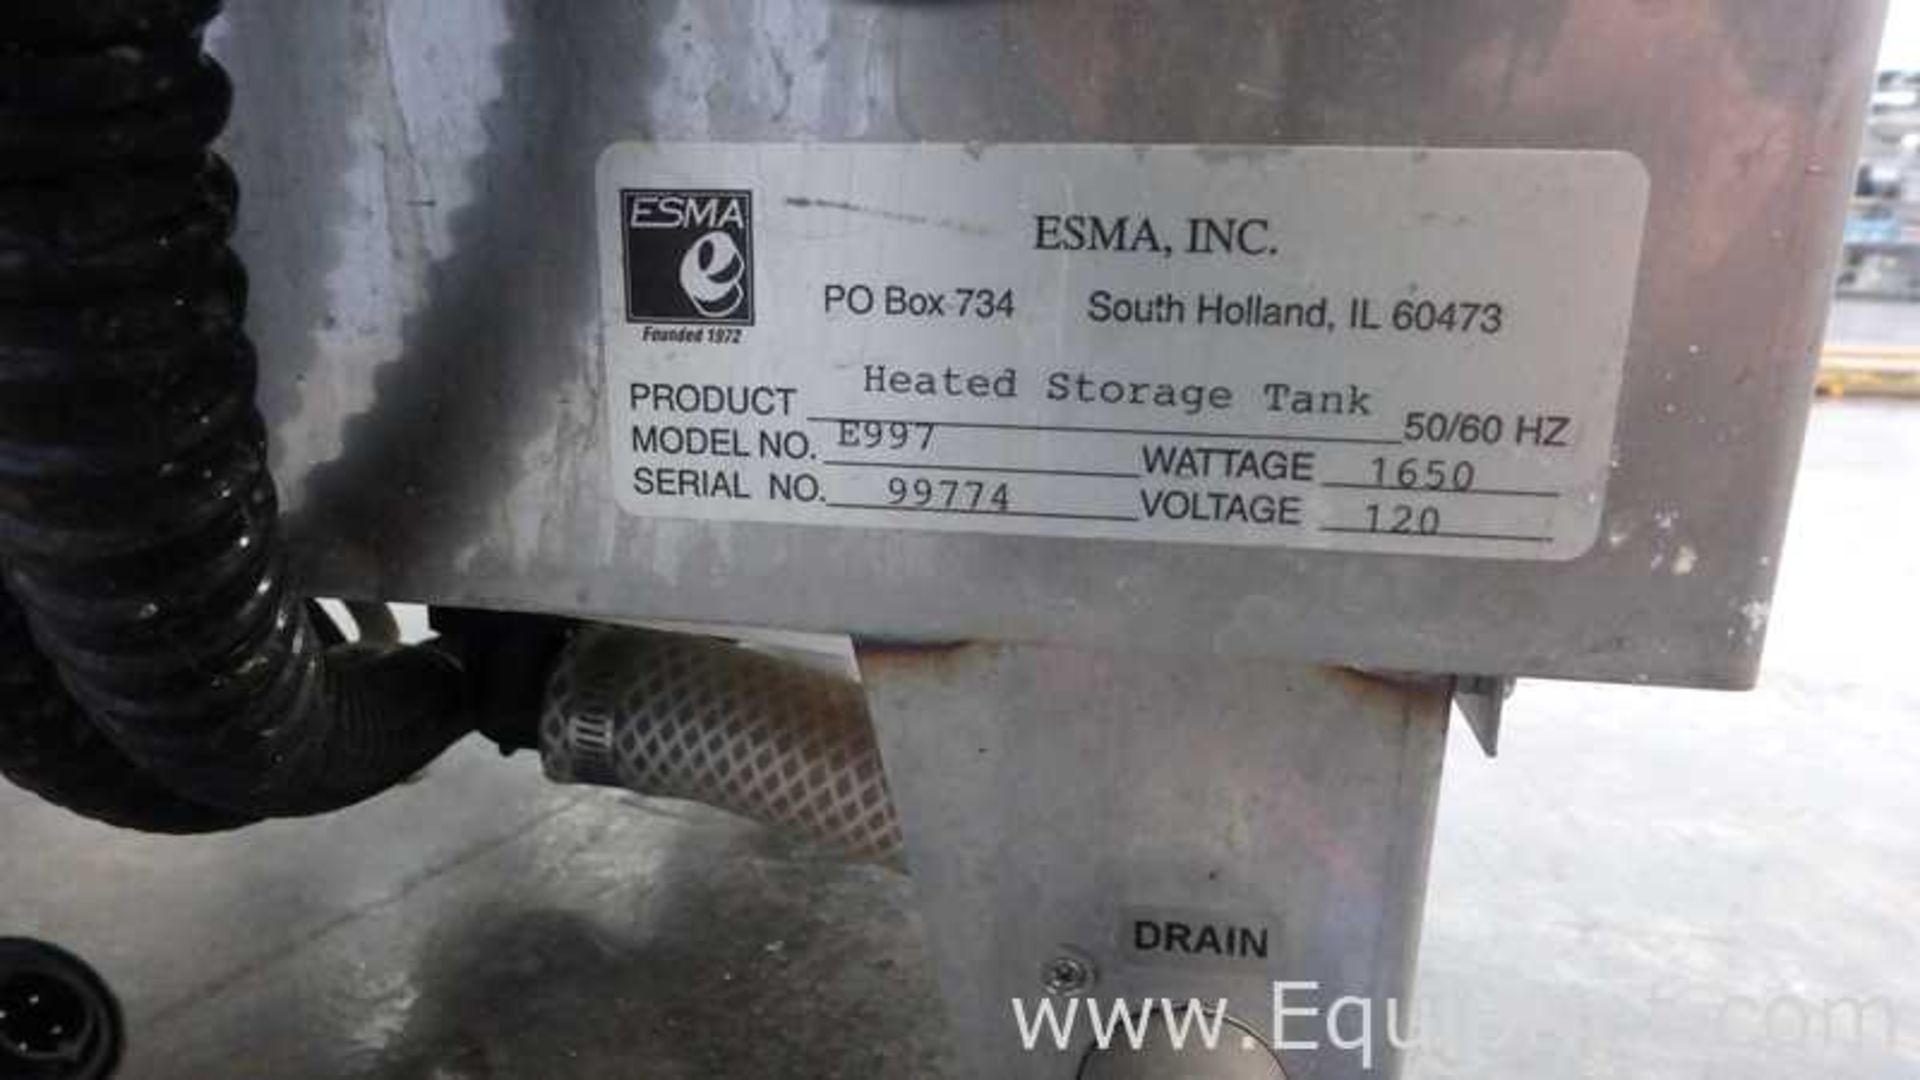 ESMA Inc. E700 Ultrasonic Cleaning System with E997 30Gal Heated Storage Tank - Image 37 of 38